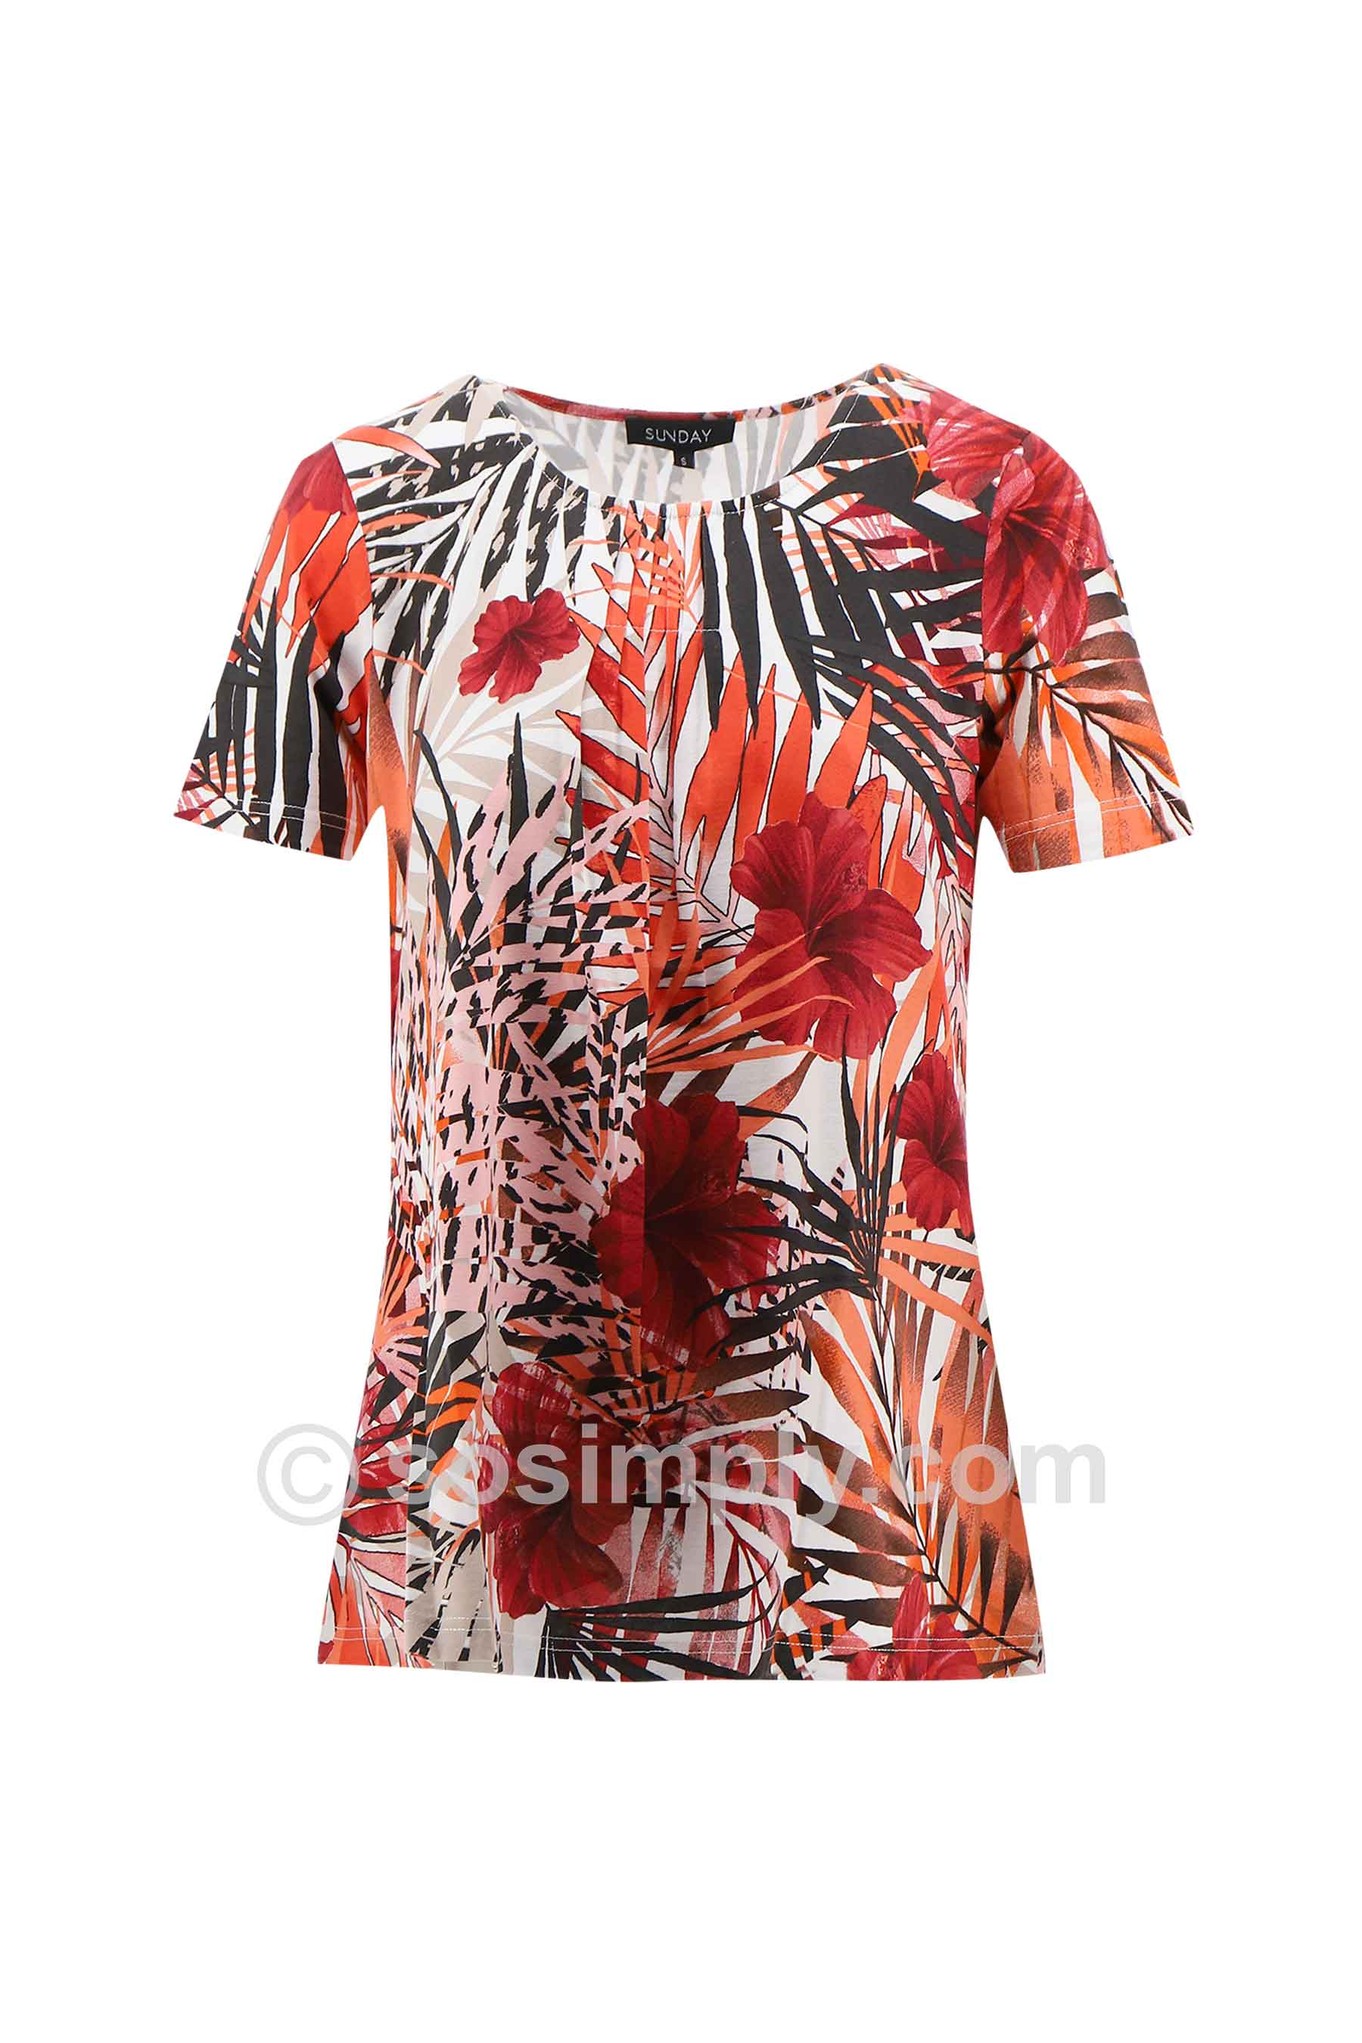 Sunday Elina Pleated Floral Fern Top